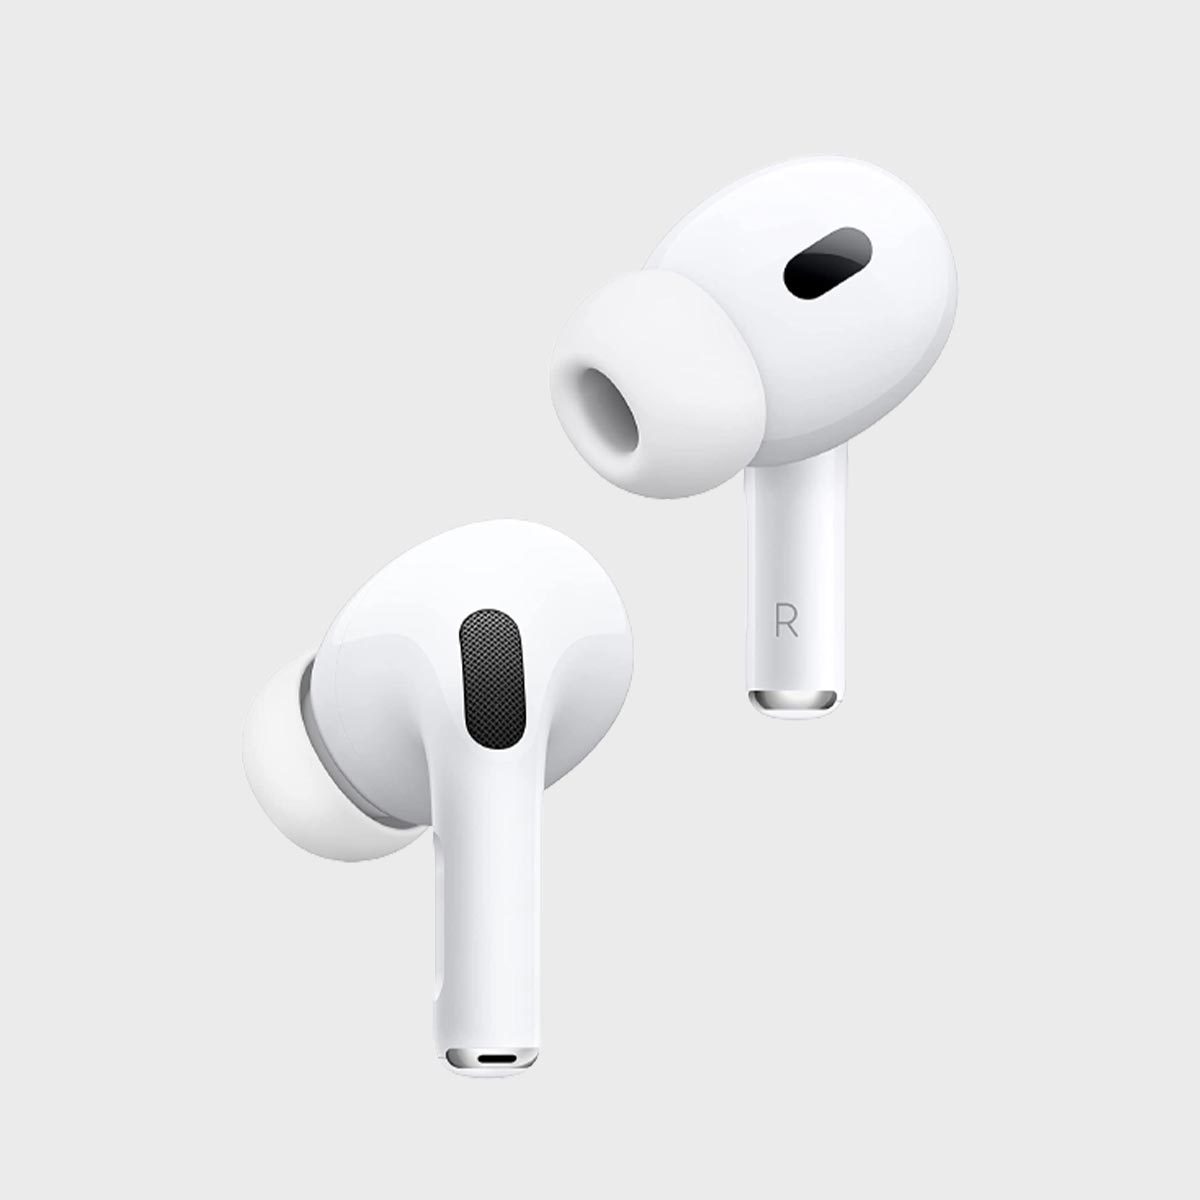 <p>The <a href="https://www.amazon.com/Apple-Generation-Cancelling-Transparency-Personalized/dp/B0BDHWDR12" rel="noopener noreferrer">Apple AirPods Pro</a> is one of the best Amazon travel accessories for music lovers. Noise-canceling capabilities allow you to hear less ambient sounds on a hectic plane and better enjoy music, movies or podcasts (and block out crying babies!). The AirPods Pro case features a small lanyard hole so you can carry these earbuds around on the go, and grab them out of your purse or backpack for the flight. FYI: Here's <a href="https://www.rd.com/article/how-to-clean-airpods/" rel="noopener noreferrer">how to clean AirPods</a> without damaging them.</p> <p class="listicle-page__cta-button-shop"><a class="shop-btn" href="https://www.amazon.com/Apple-Generation-Cancelling-Transparency-Personalized/dp/B0BDHWDR12">Shop Now</a></p>